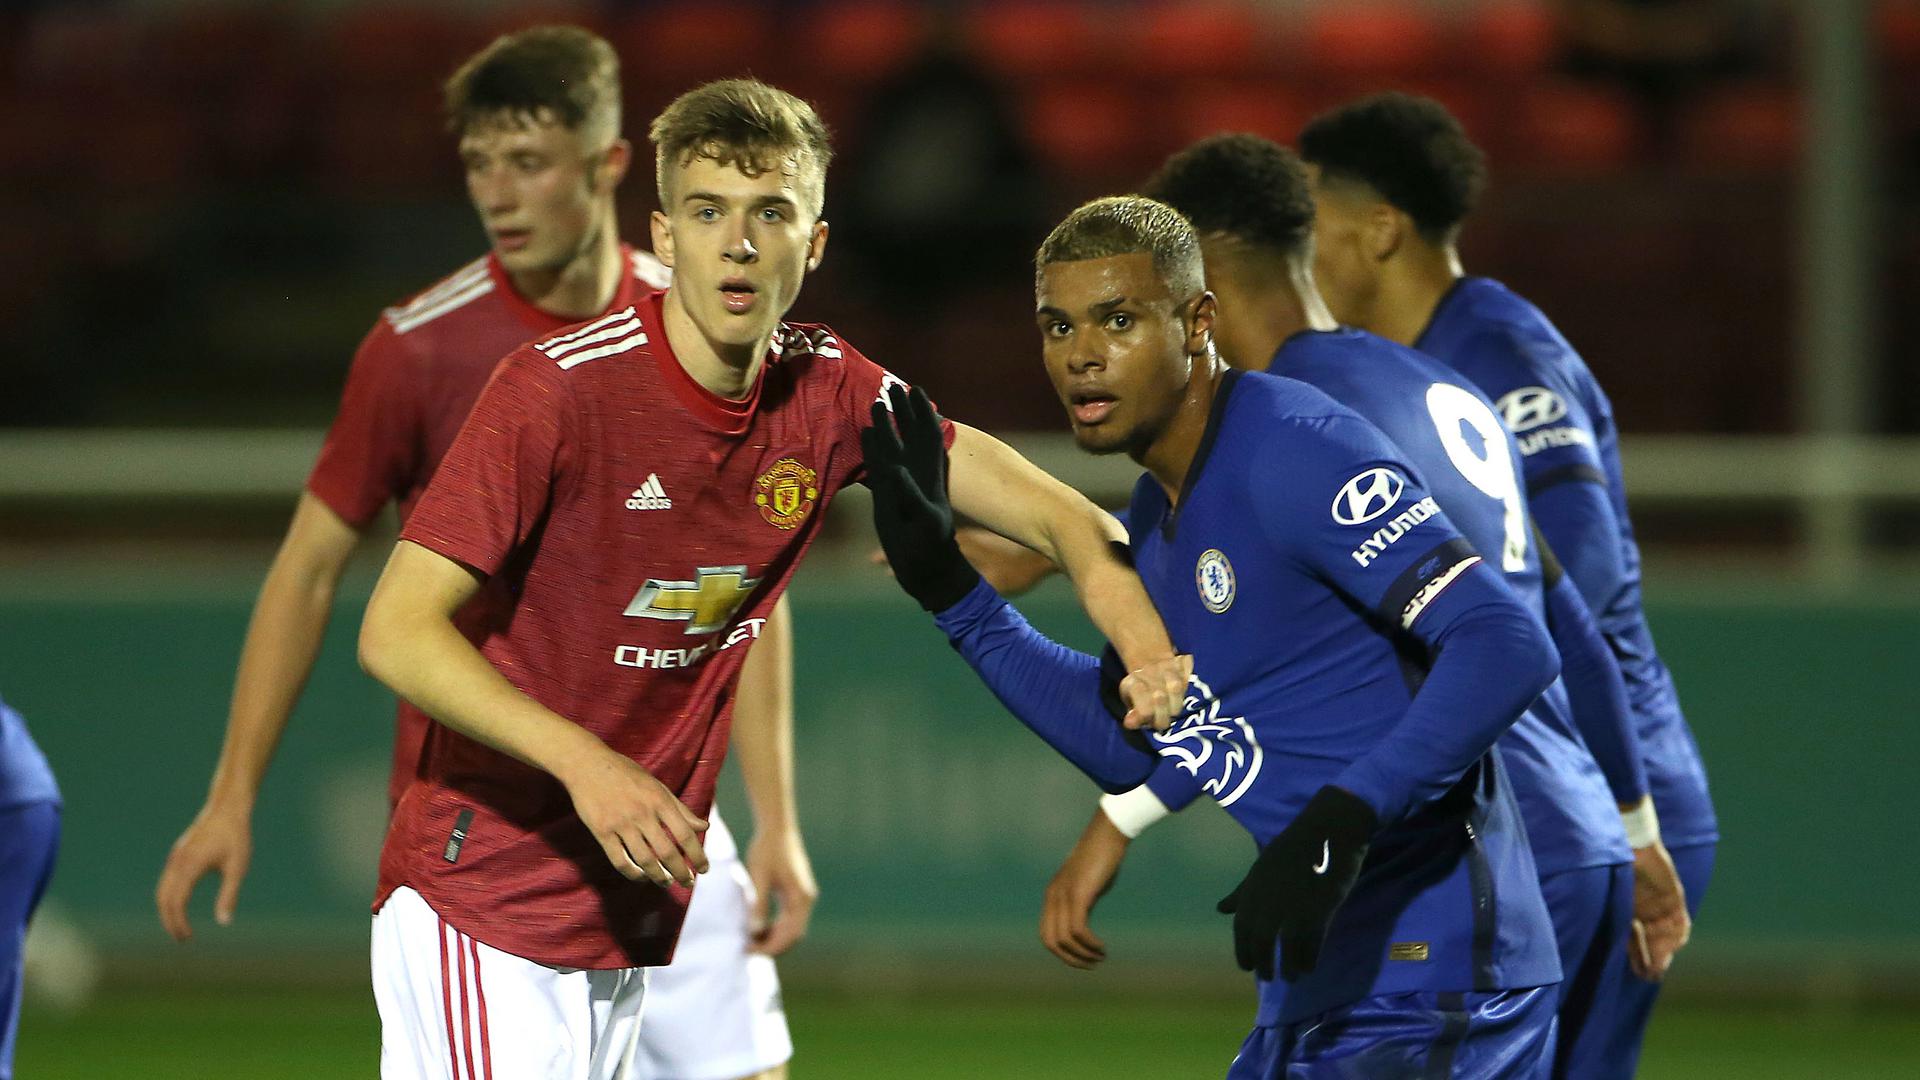 Match Report On Man Utd V Chelsea Fa Youth Cup Semi Final 30 October Manchester United